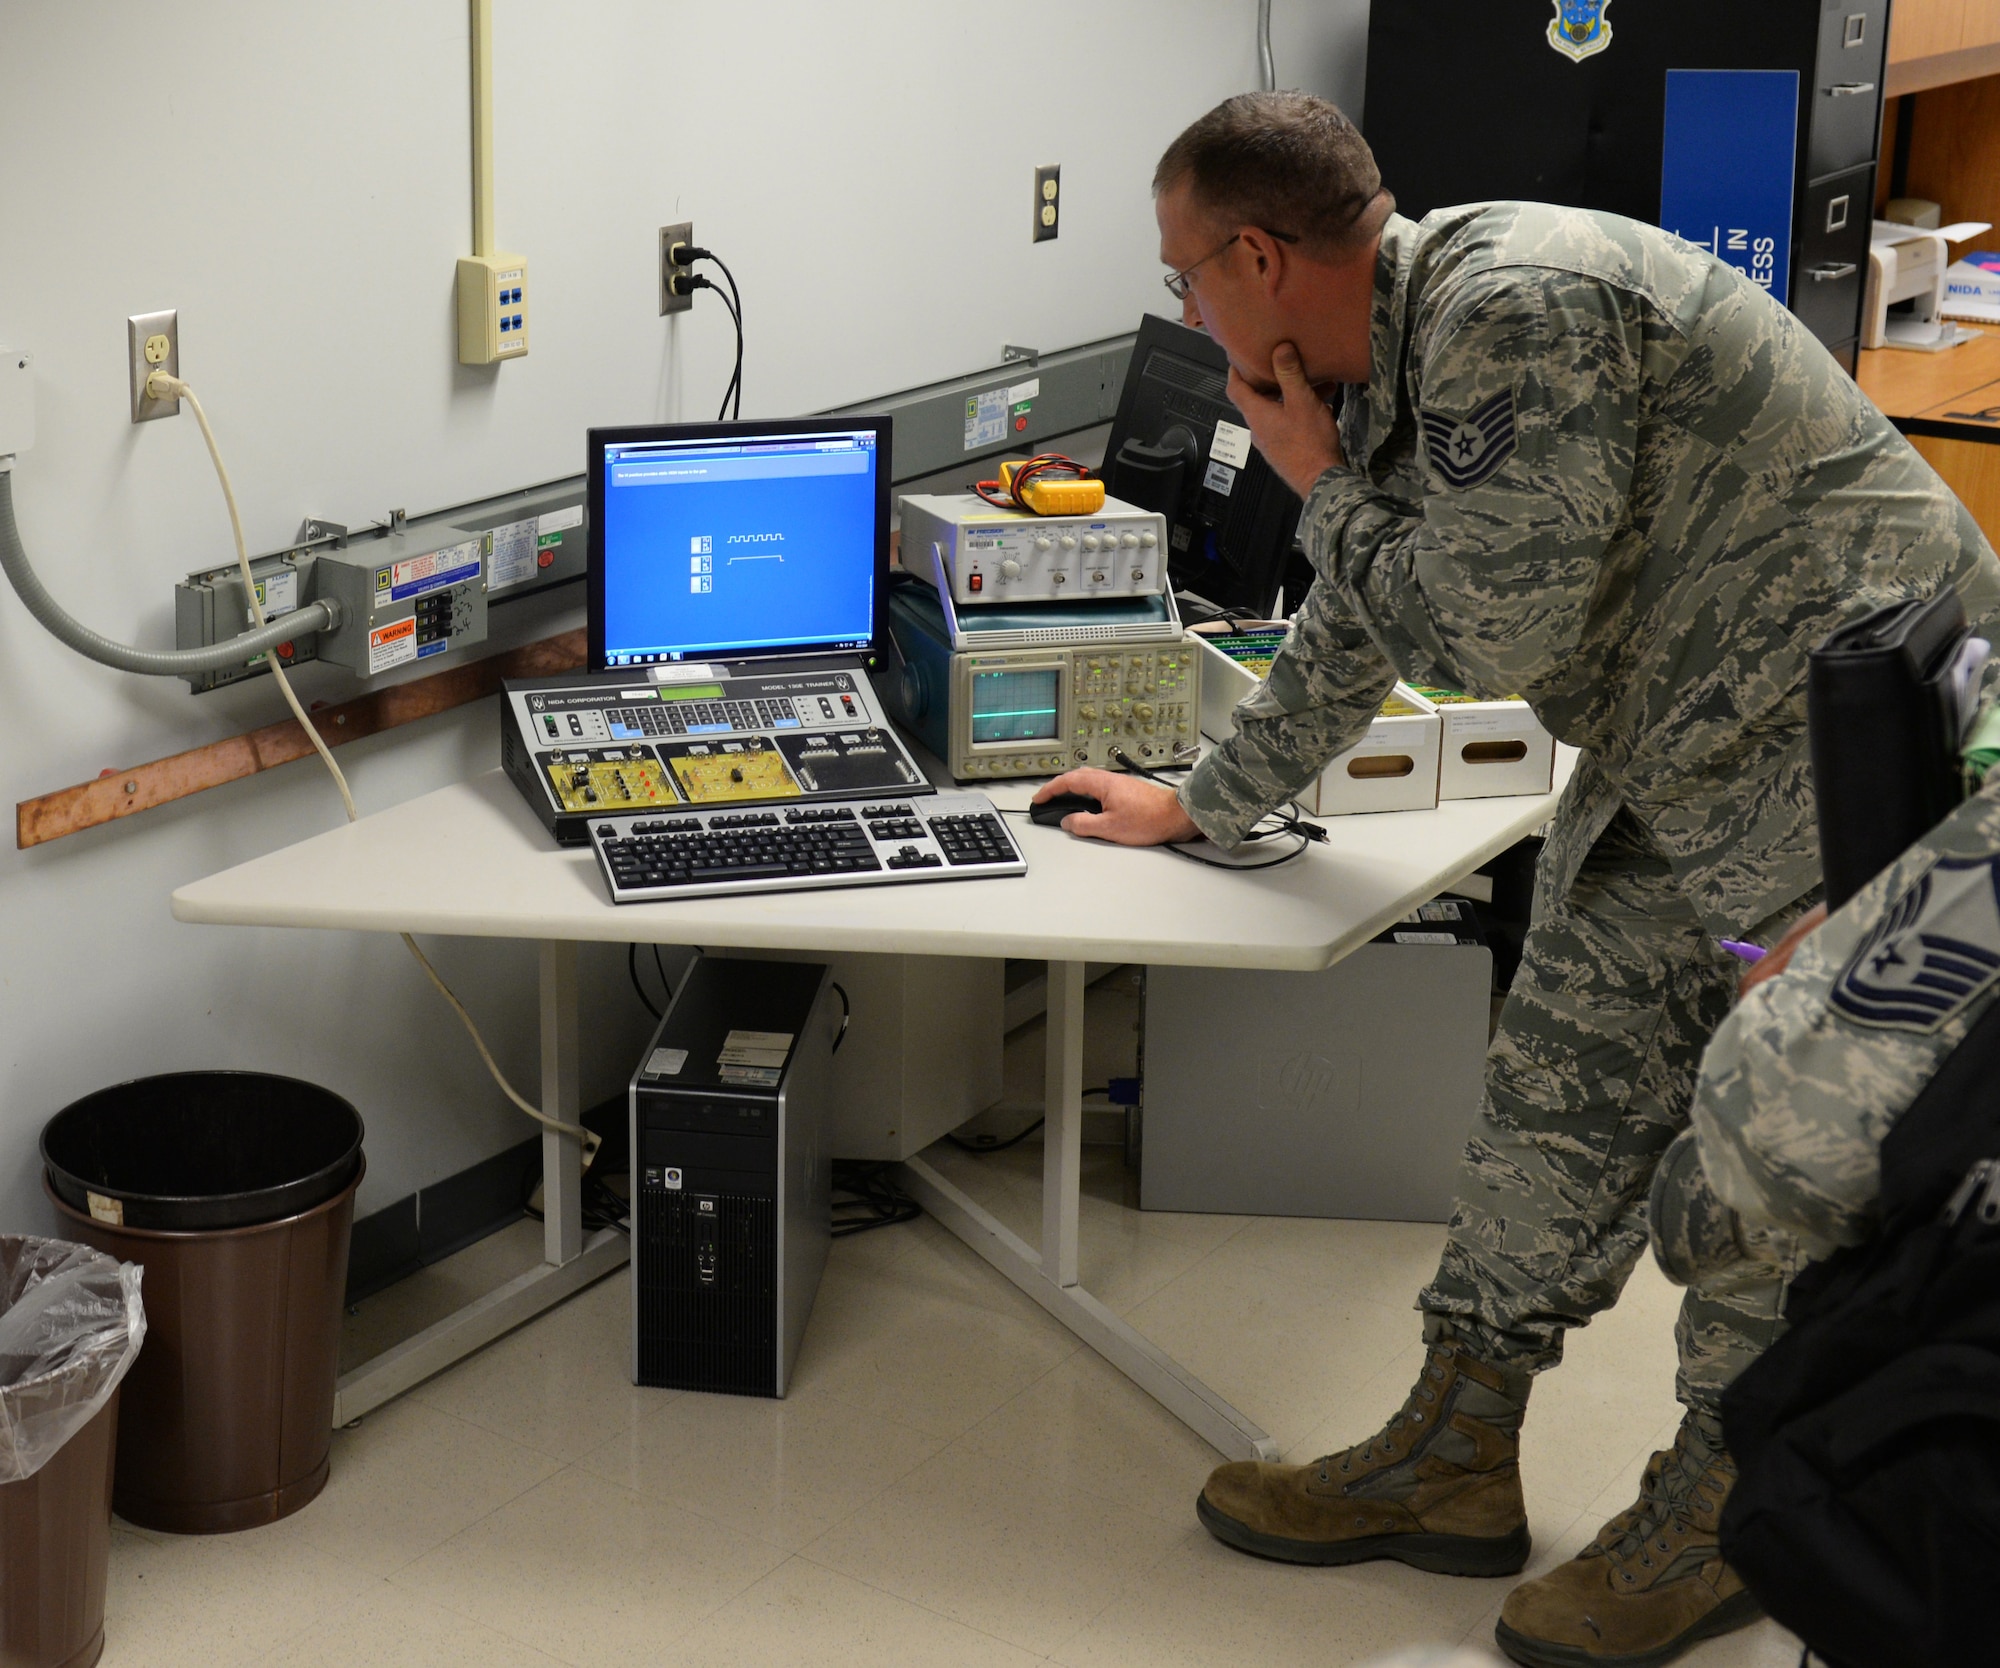 Tech. Sgt. Chad Quesenberry, 335th Training Squadron instructor supervisor, demonstrates the functions of a Nida electronic trainer to members of the Community College of the Air Force inspection team at Wolfe Hall Aug. 10, 2016, on Keesler Air Force Base, Miss. The CCAF inspection team visited the 81st Training Group to assess class curriculums to ensure Keesler maintains its accreditation so students can receive college credits for their completed technical schools. (U.S. Air Force photo by Airman 1st Class Travis Beihl/Released)